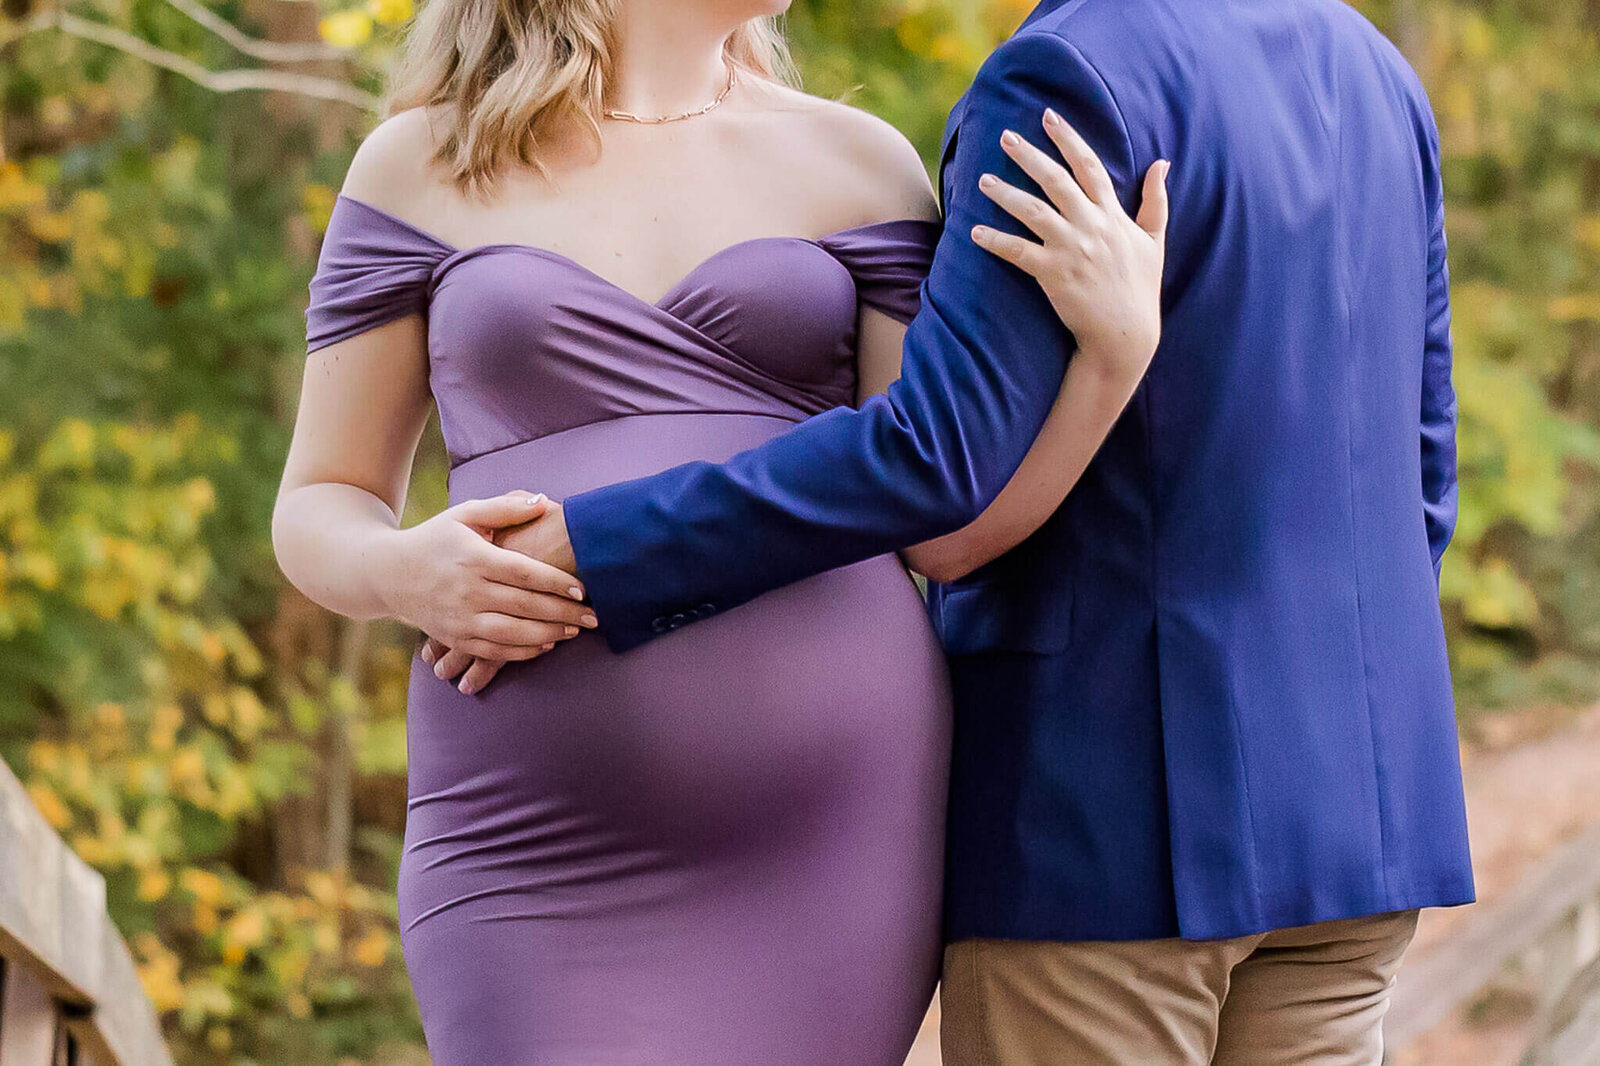 A close-up of a pregnant woman and her husband for their maternity portraits.